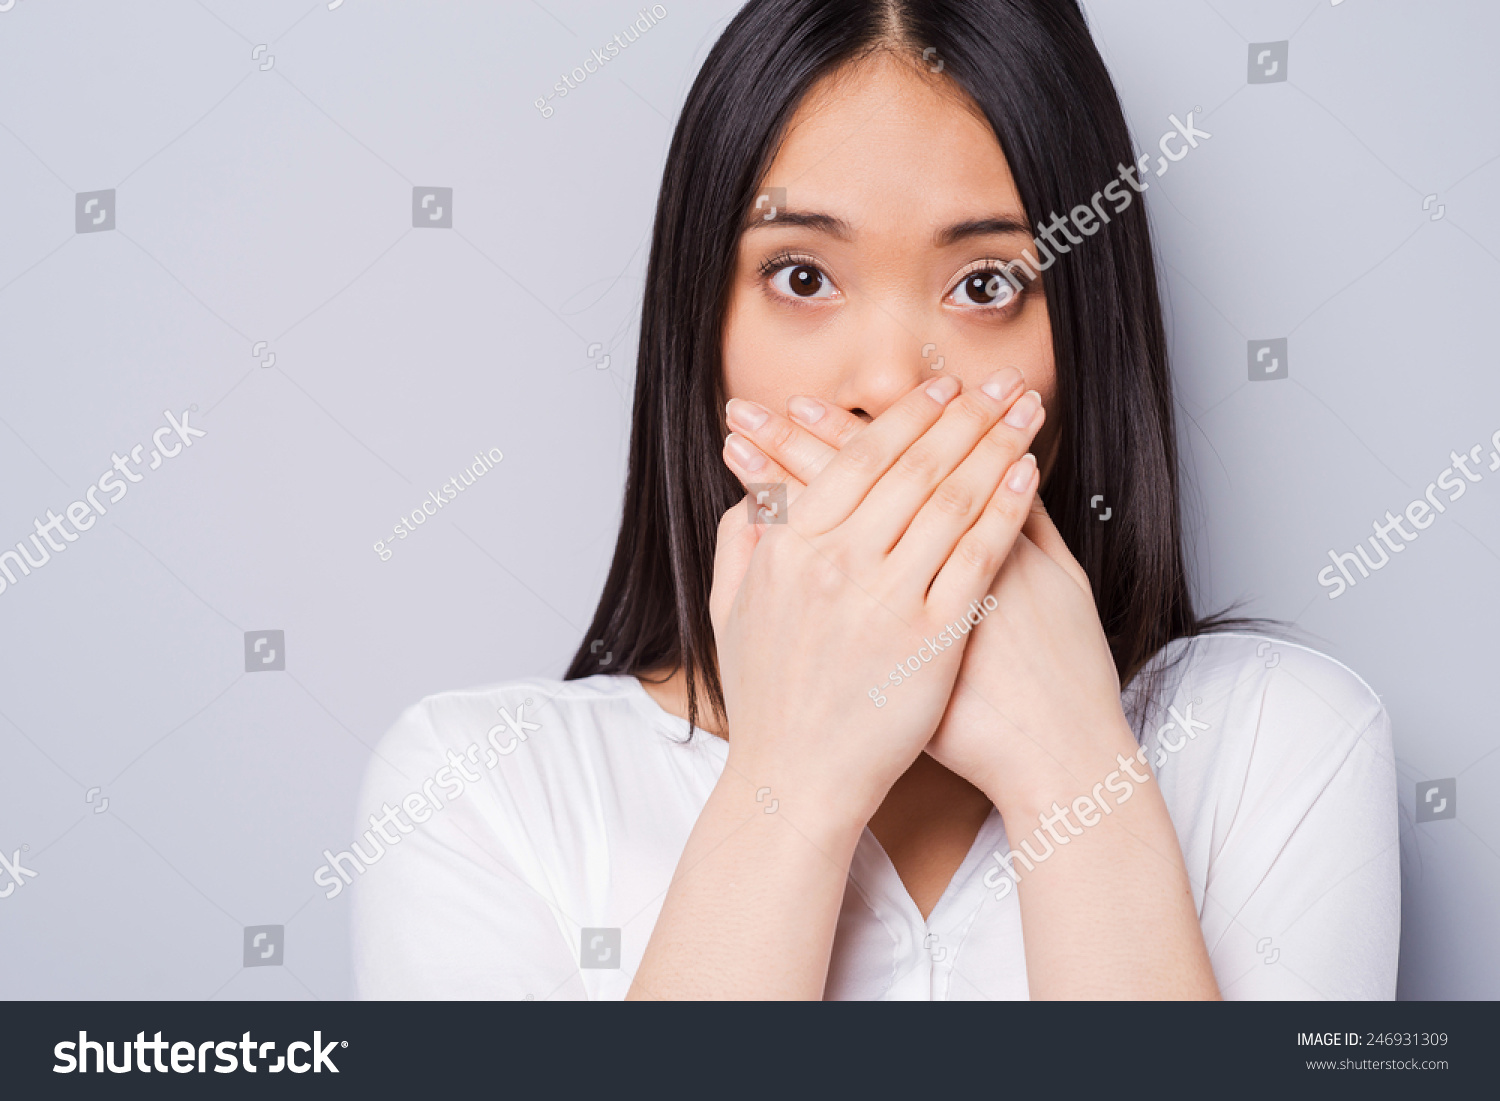 Oops! Surprised Young Asian Woman Covering Mouth With Hands And Staring ...